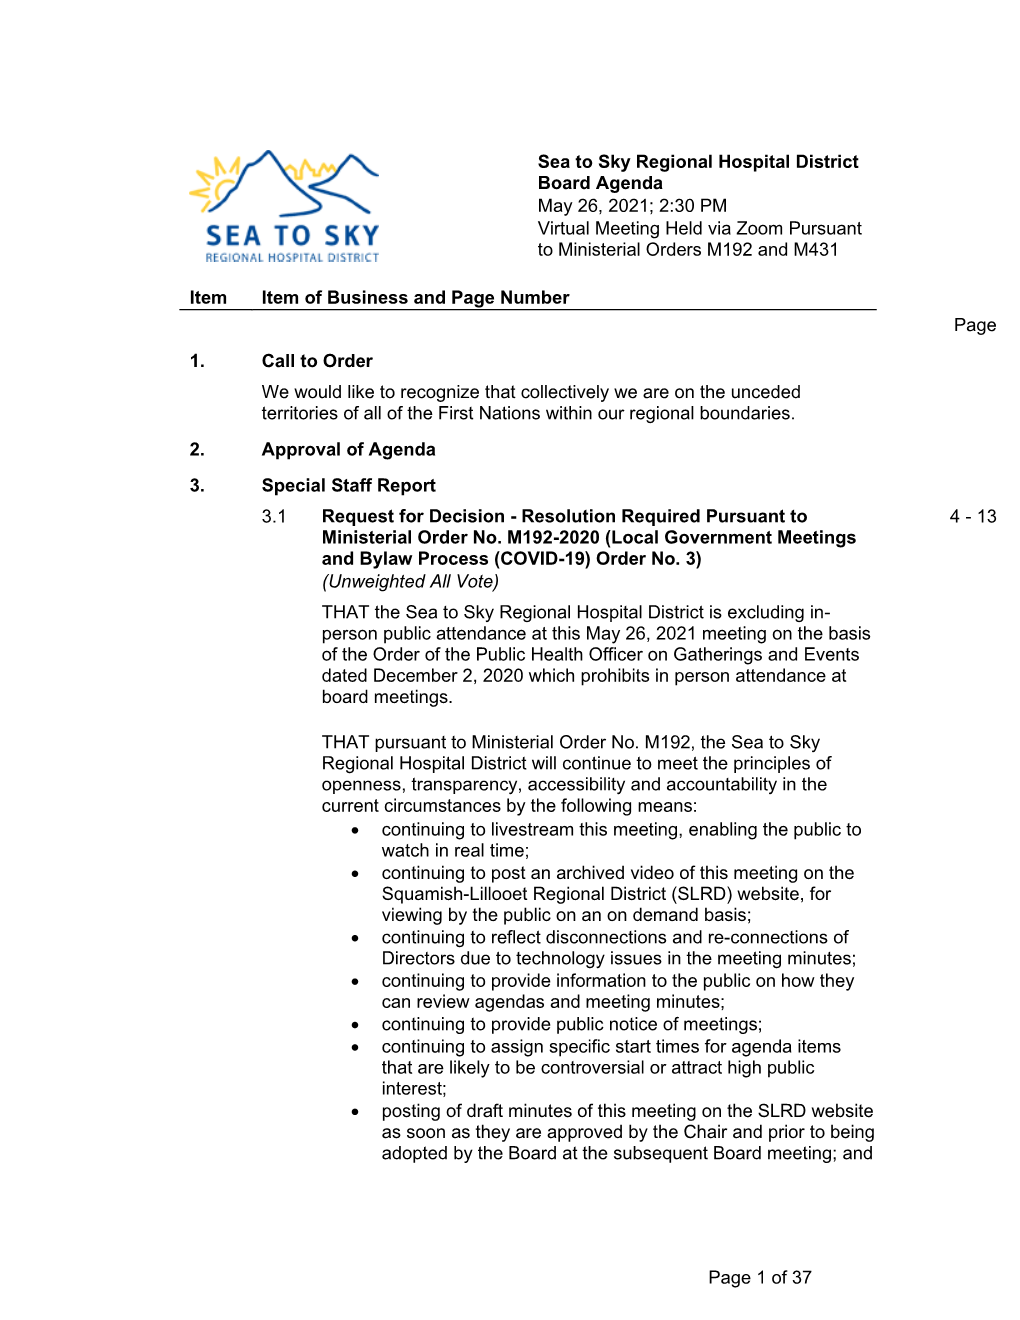 Sea to Sky Regional Hospital District Board Agenda May 26, 2021; 2:30 PM Virtual Meeting Held Via Zoom Pursuant to Ministerial Orders M192 and M431